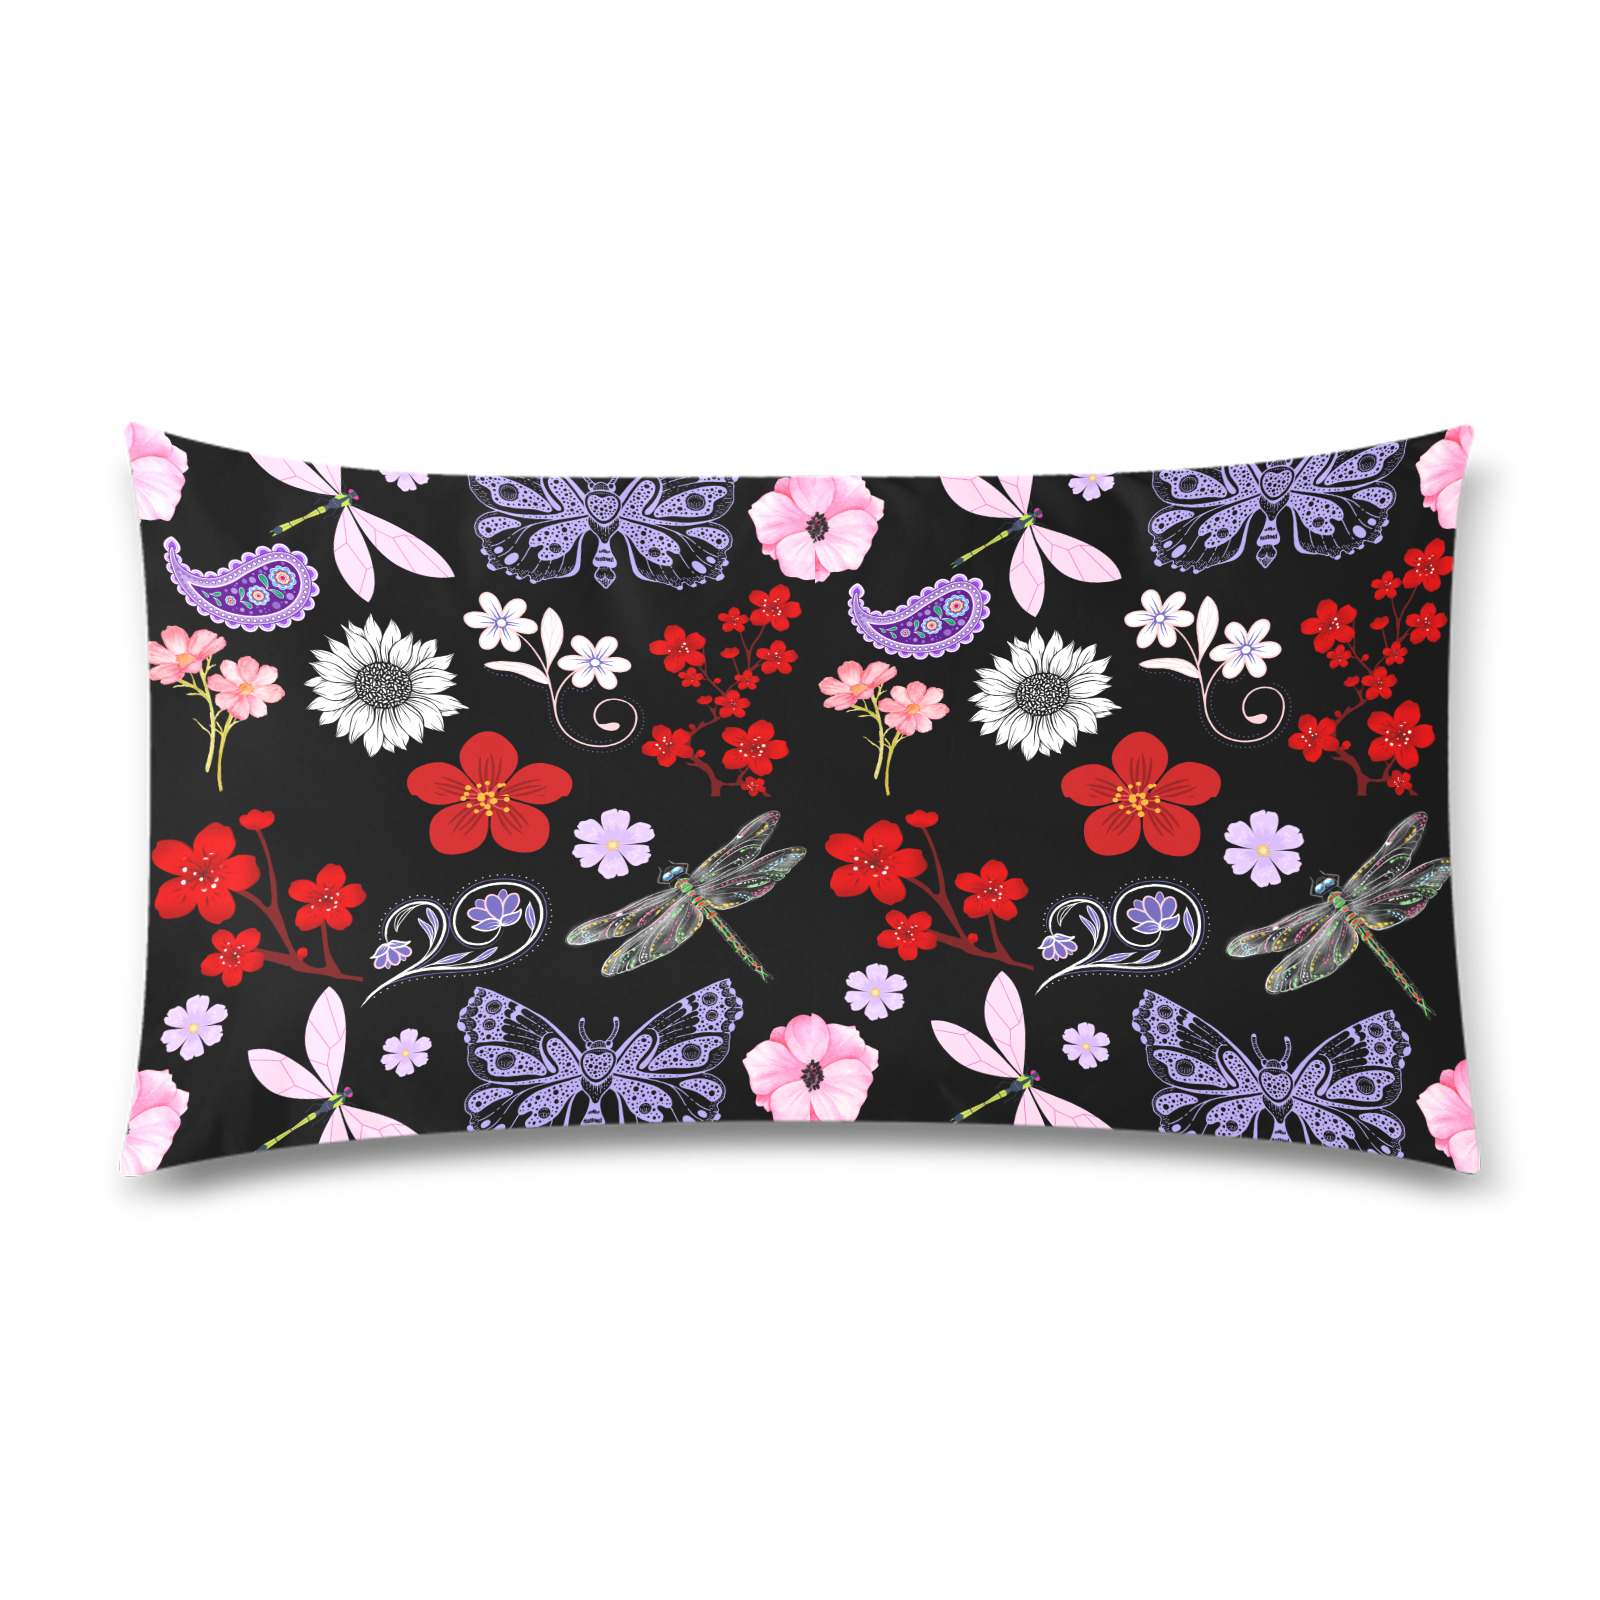 Black, Red, Pink, Purple, Dragonflies, Butterfly and Flowers Design Rectangle Pillow Case 20"x36"(Twin Sides)